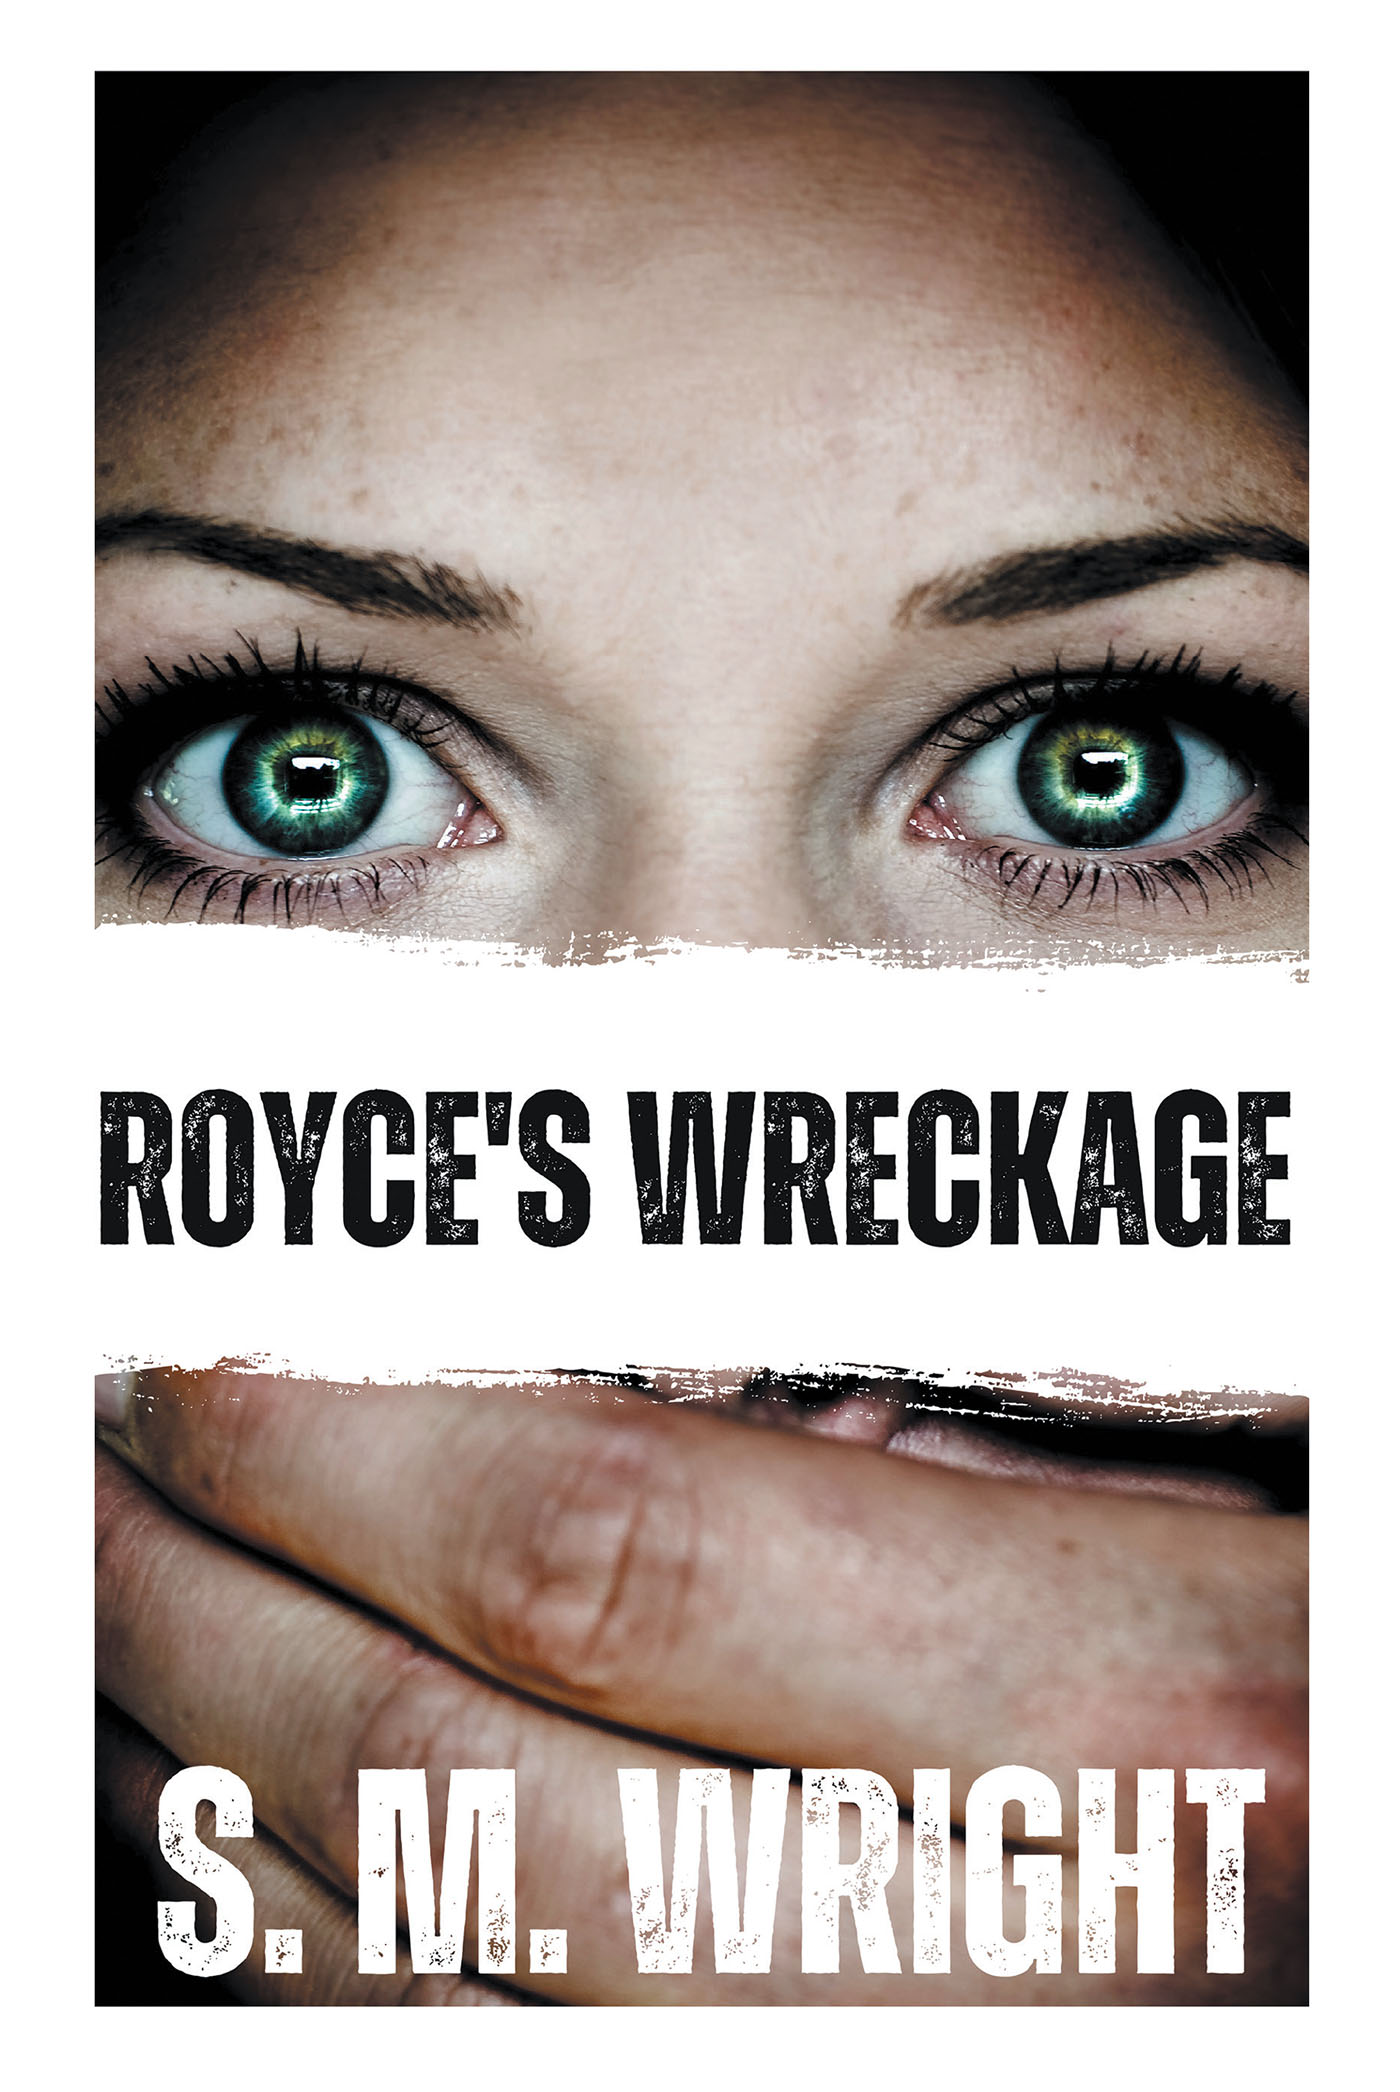 Author S. M. Wright’s New Book, "Royce's Wreckage," Centers Around the Intersecting Lives of Two Women from Vastly Different Worlds Who Just Might be What the Other Needs